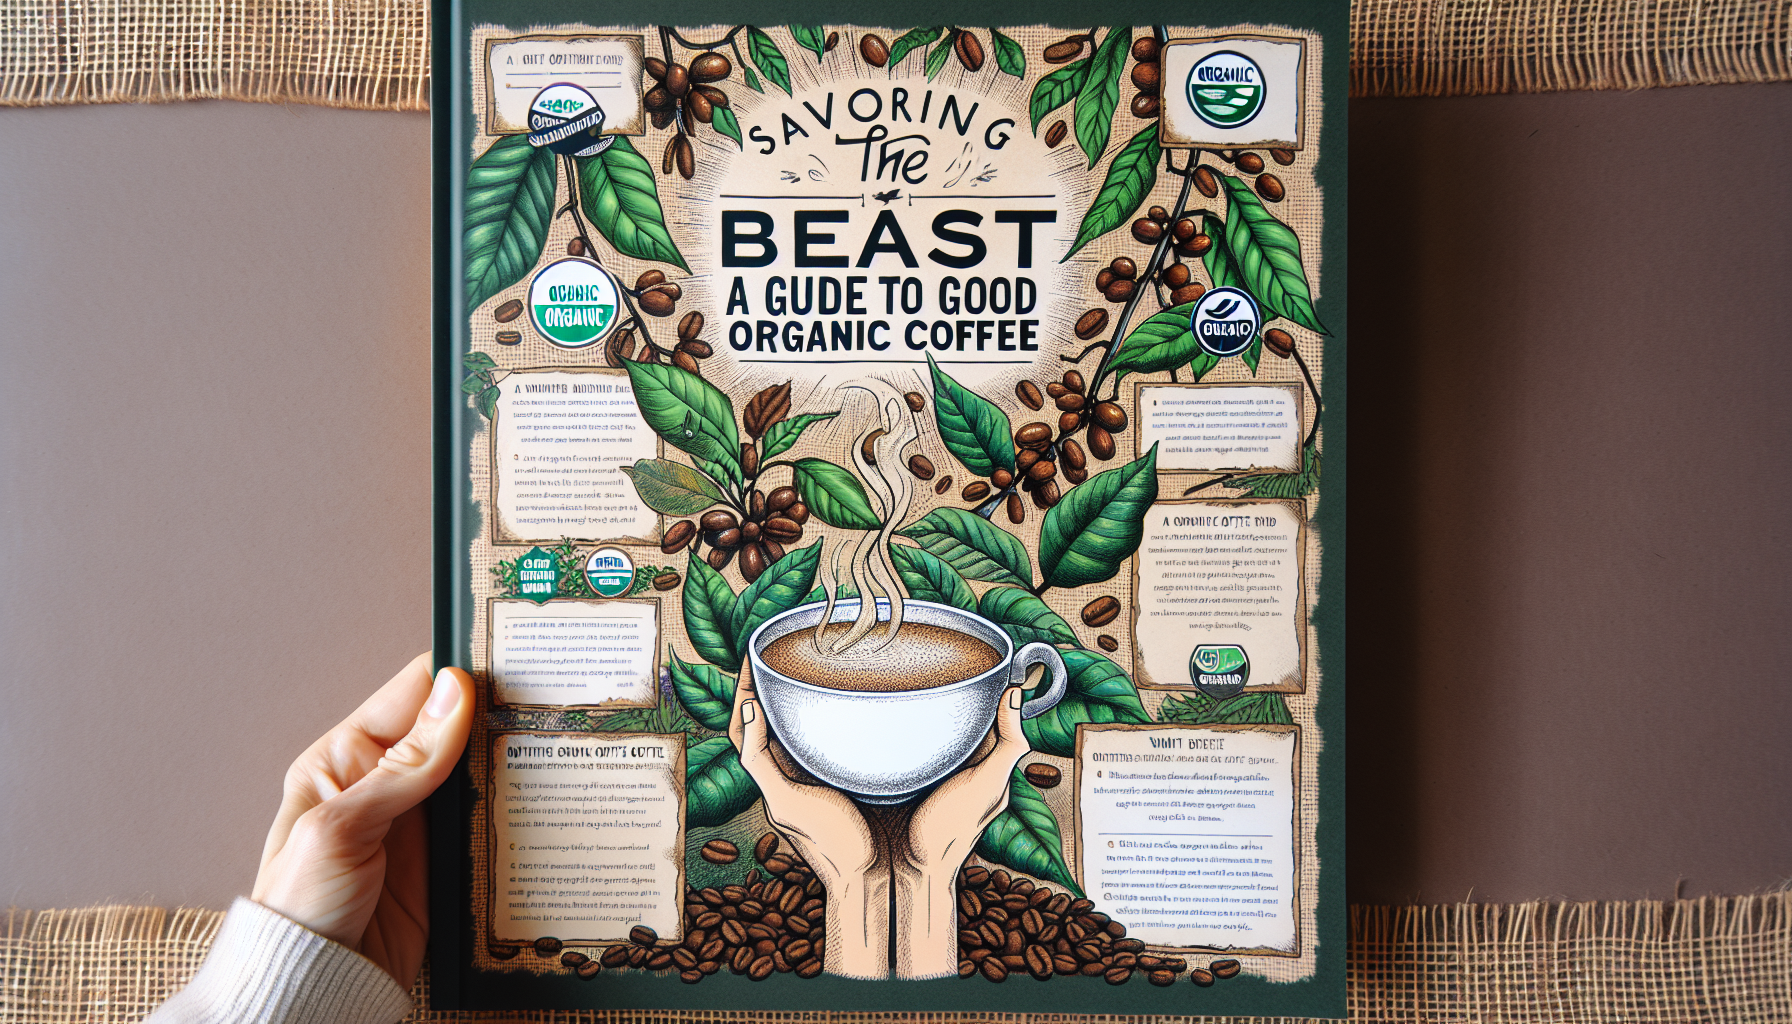 An illustrative guide titled 'Savoring the Best: A Guide to Good Organic Coffee'. The cover is decorated with drawings of lush coffee beans on verdant branches against a burlap background. Across the 